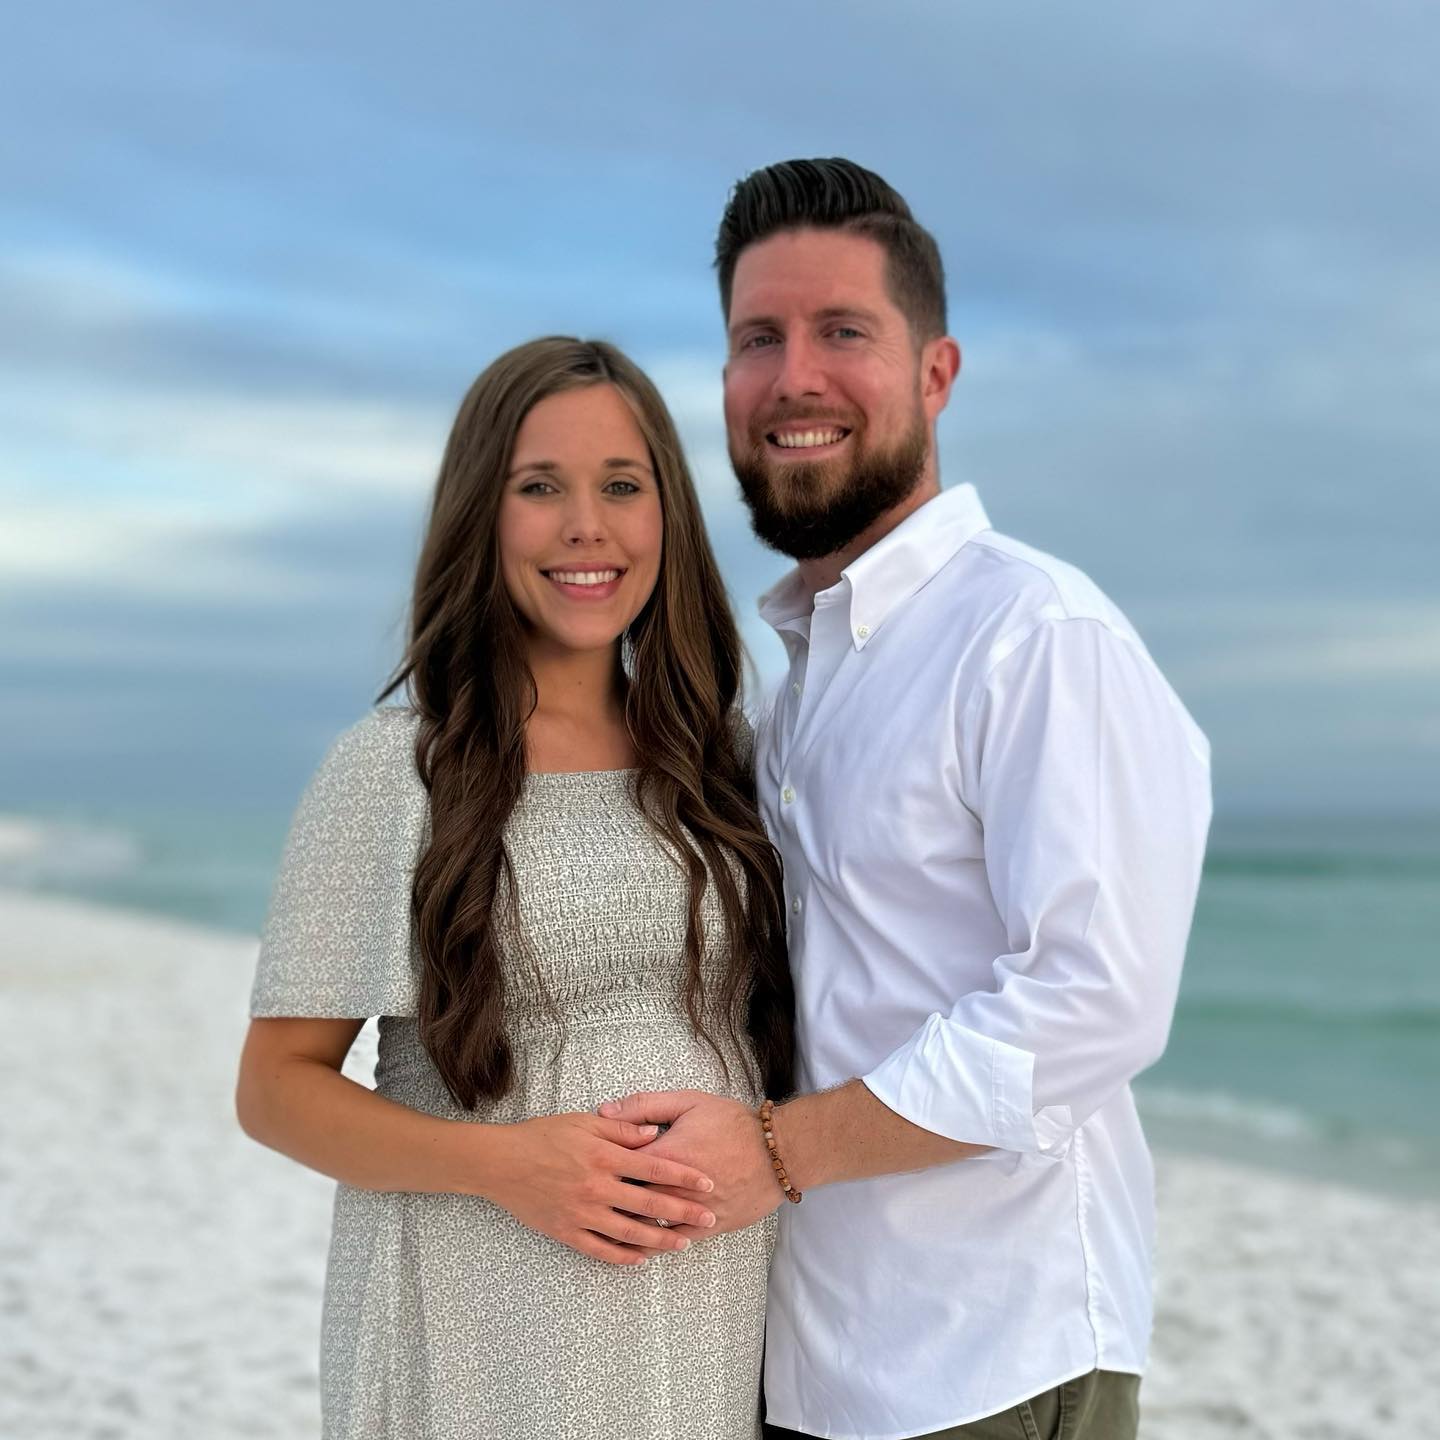 Jessa and her husband welcomed their son George to the world on December 19